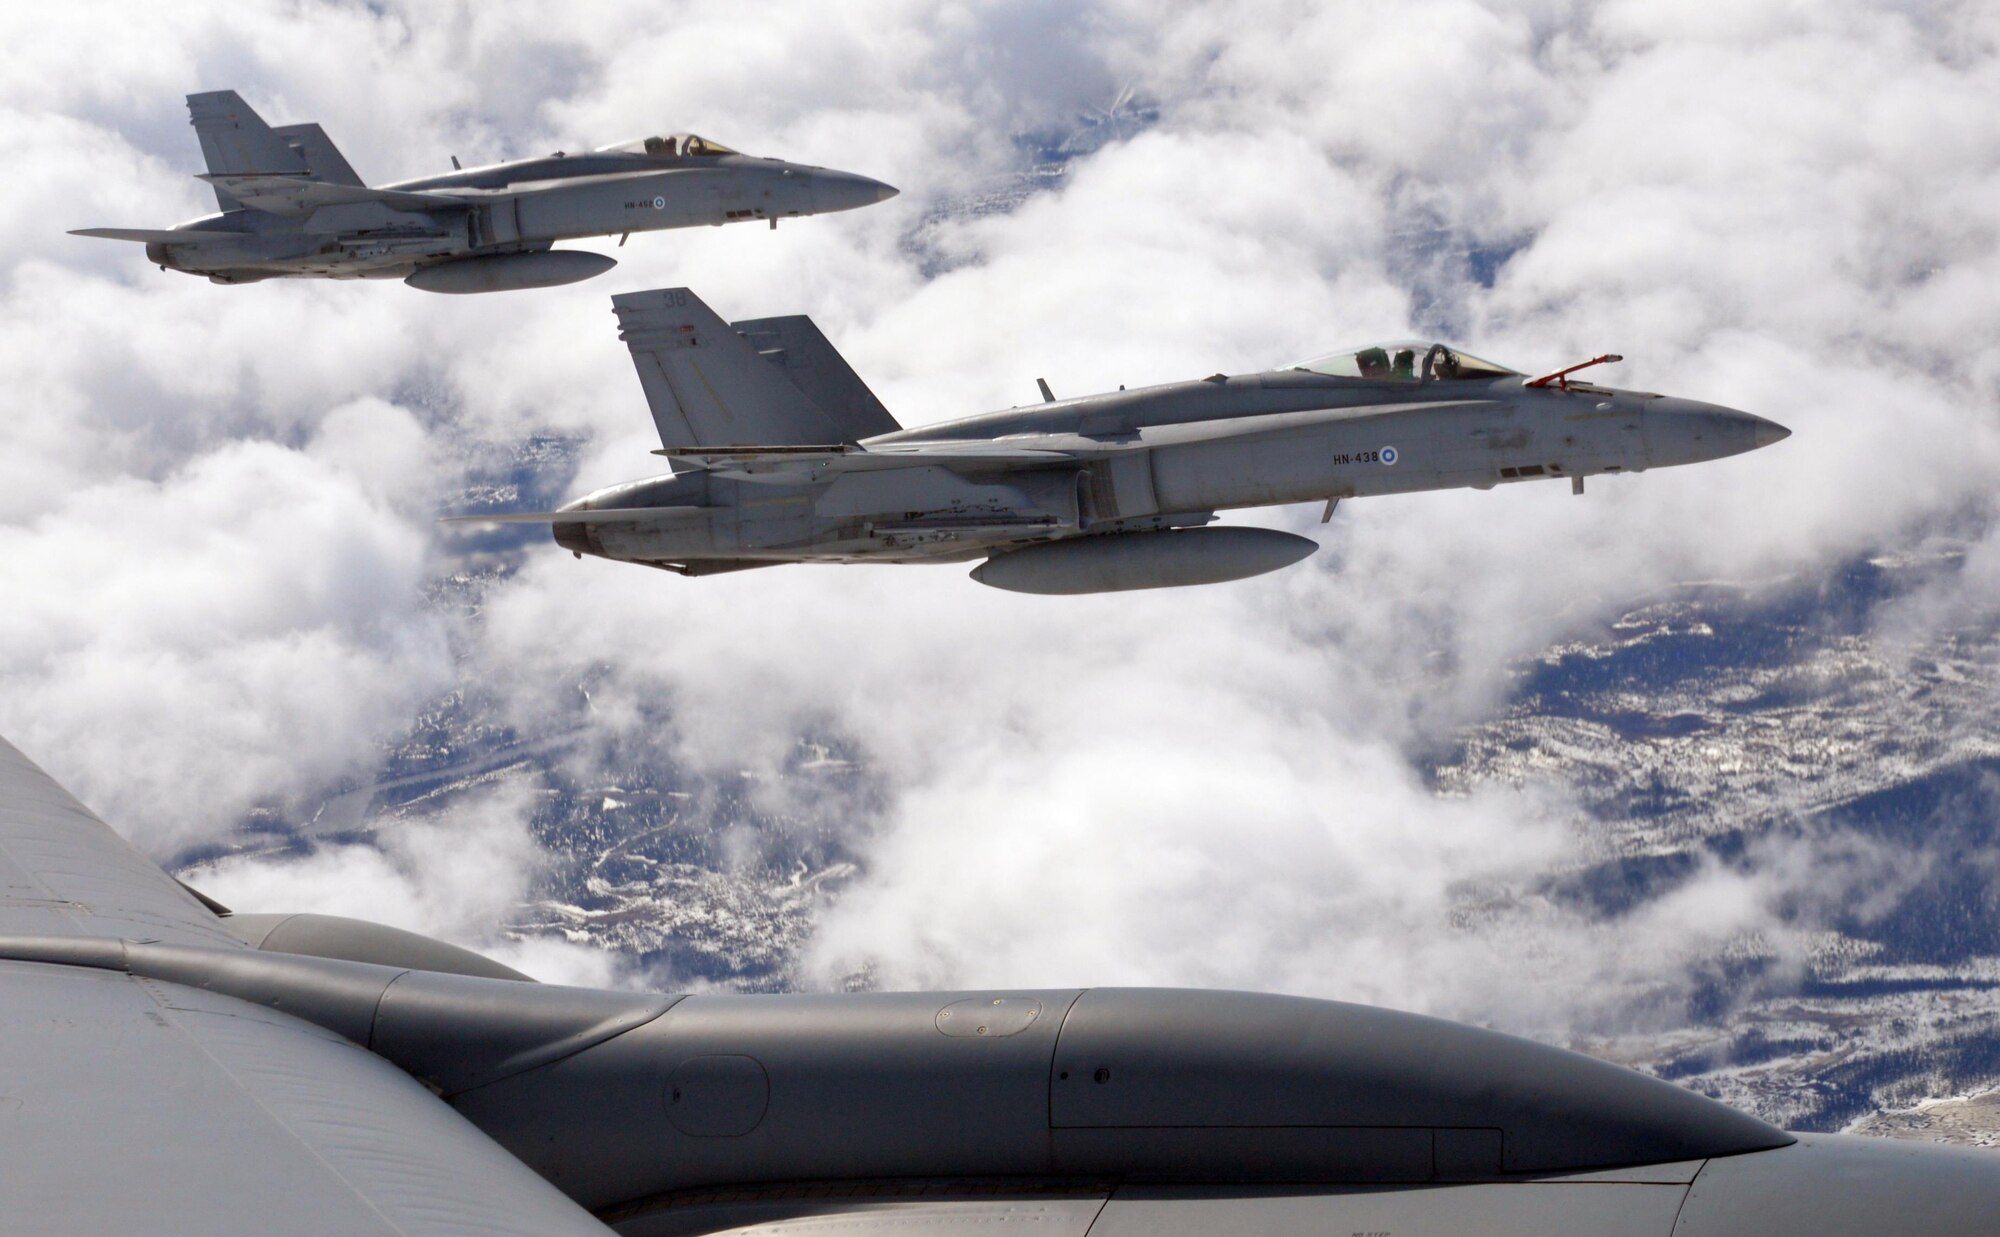 F-18 Hornets of the Finnish Air Force fly alongside a U.S. Air Force KC-135 Stratotanker from RAF Mildenhall, England, during aerial refueling over Finland, May 25, 2017. All three aircraft are participating in Arctic Challenge 2017, a multinational exercise encompassing 11 nations and more than 100 aircraft. (U.S. Air Force photo by Tech. Sgt. David Dobrydney)